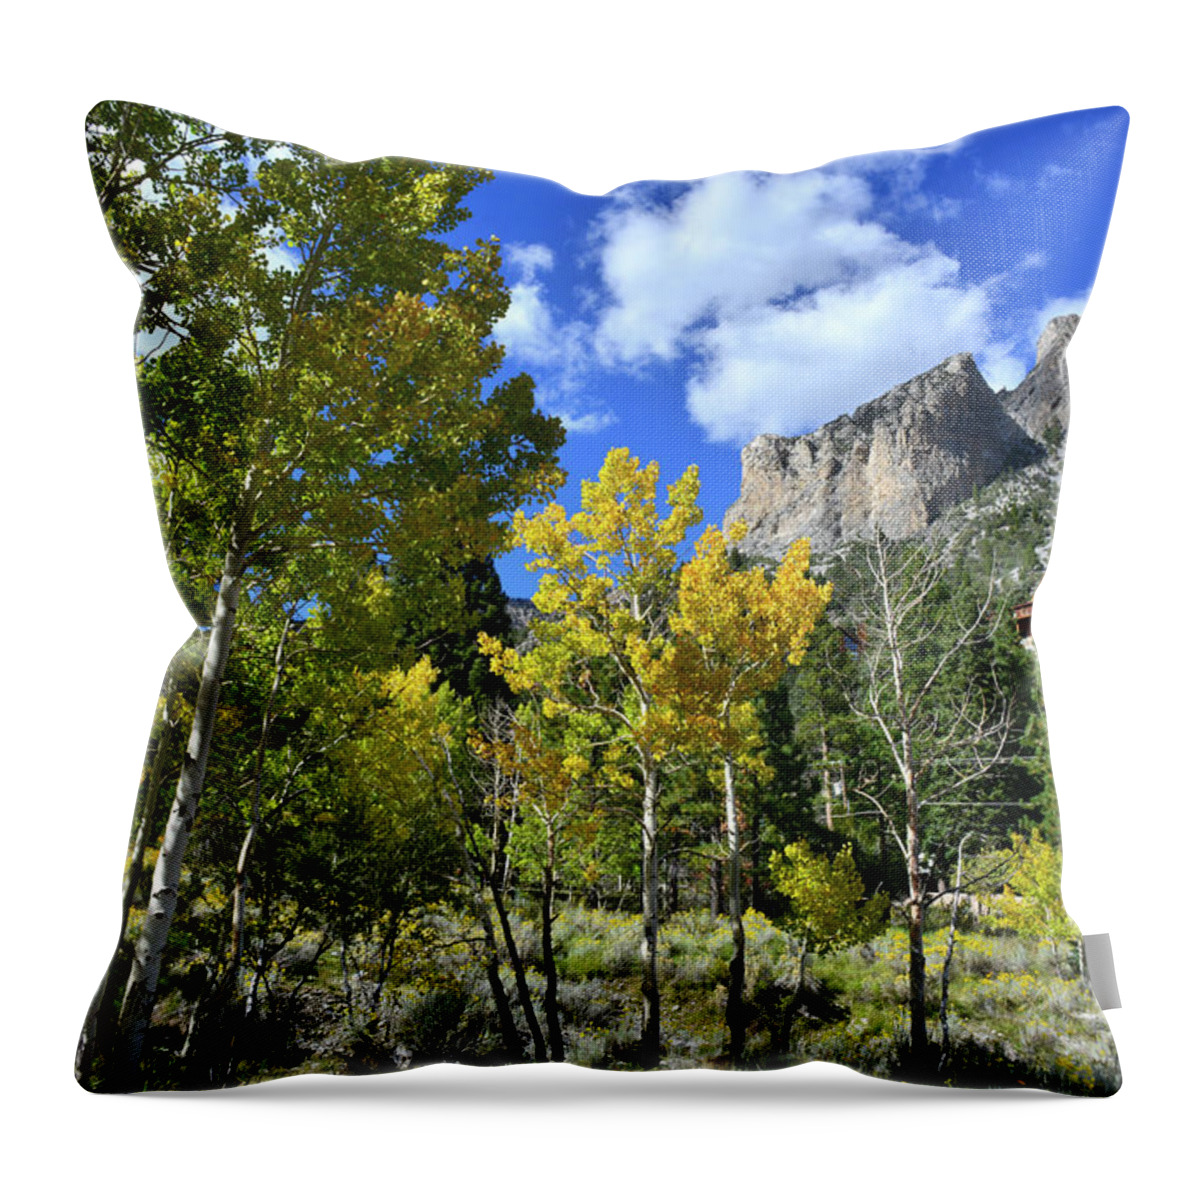 Humboldt-toiyabe National Forest Throw Pillow featuring the photograph Village Beneath Mt. Charleston by Ray Mathis